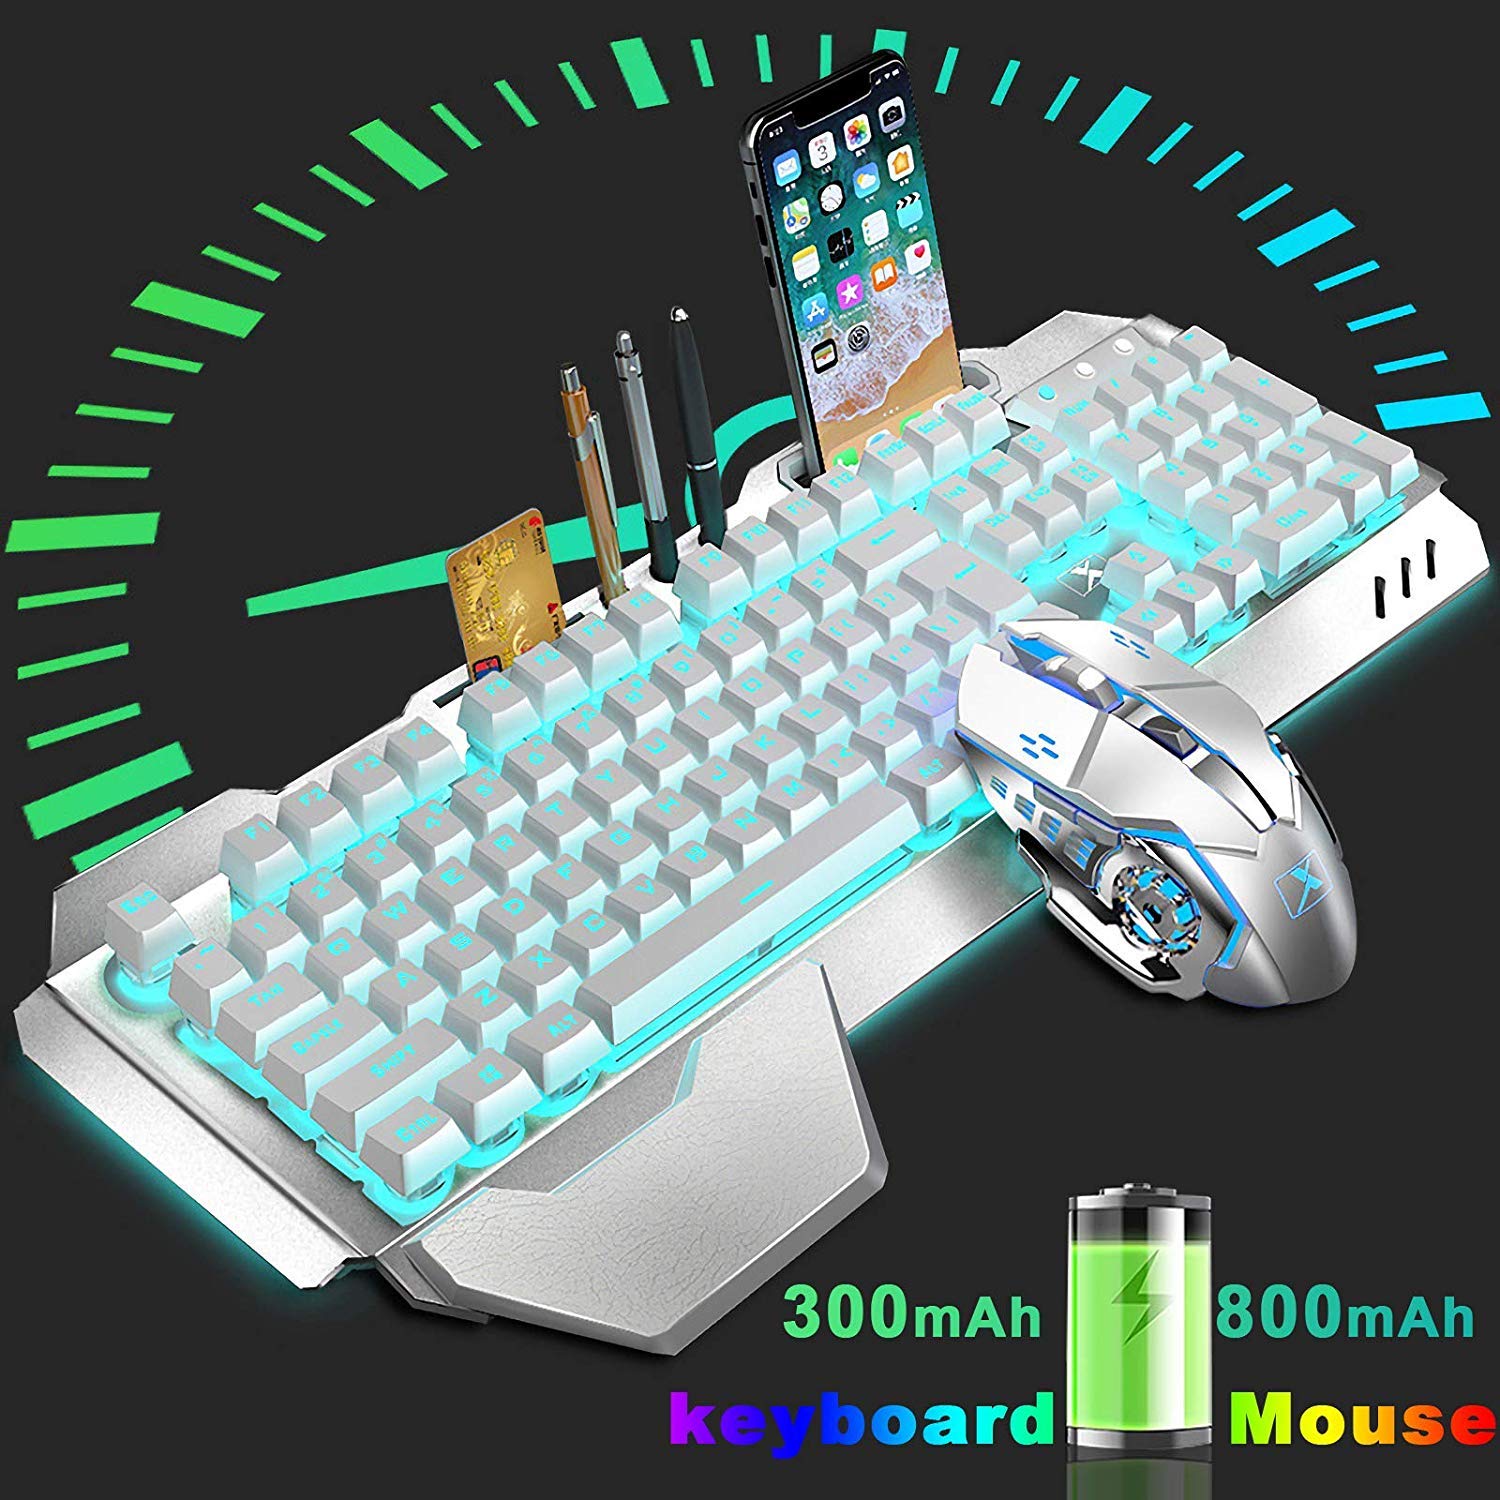 Wireless Keyboard and Mouse,Blue LED Backlit Rechargeable Keyboard Mouse with 3800mAh Battery Metal Panel,Removable Hand Rest Mechanical Feel Keyboard and 7 Color Gaming Mute Mouse for PC Gamers